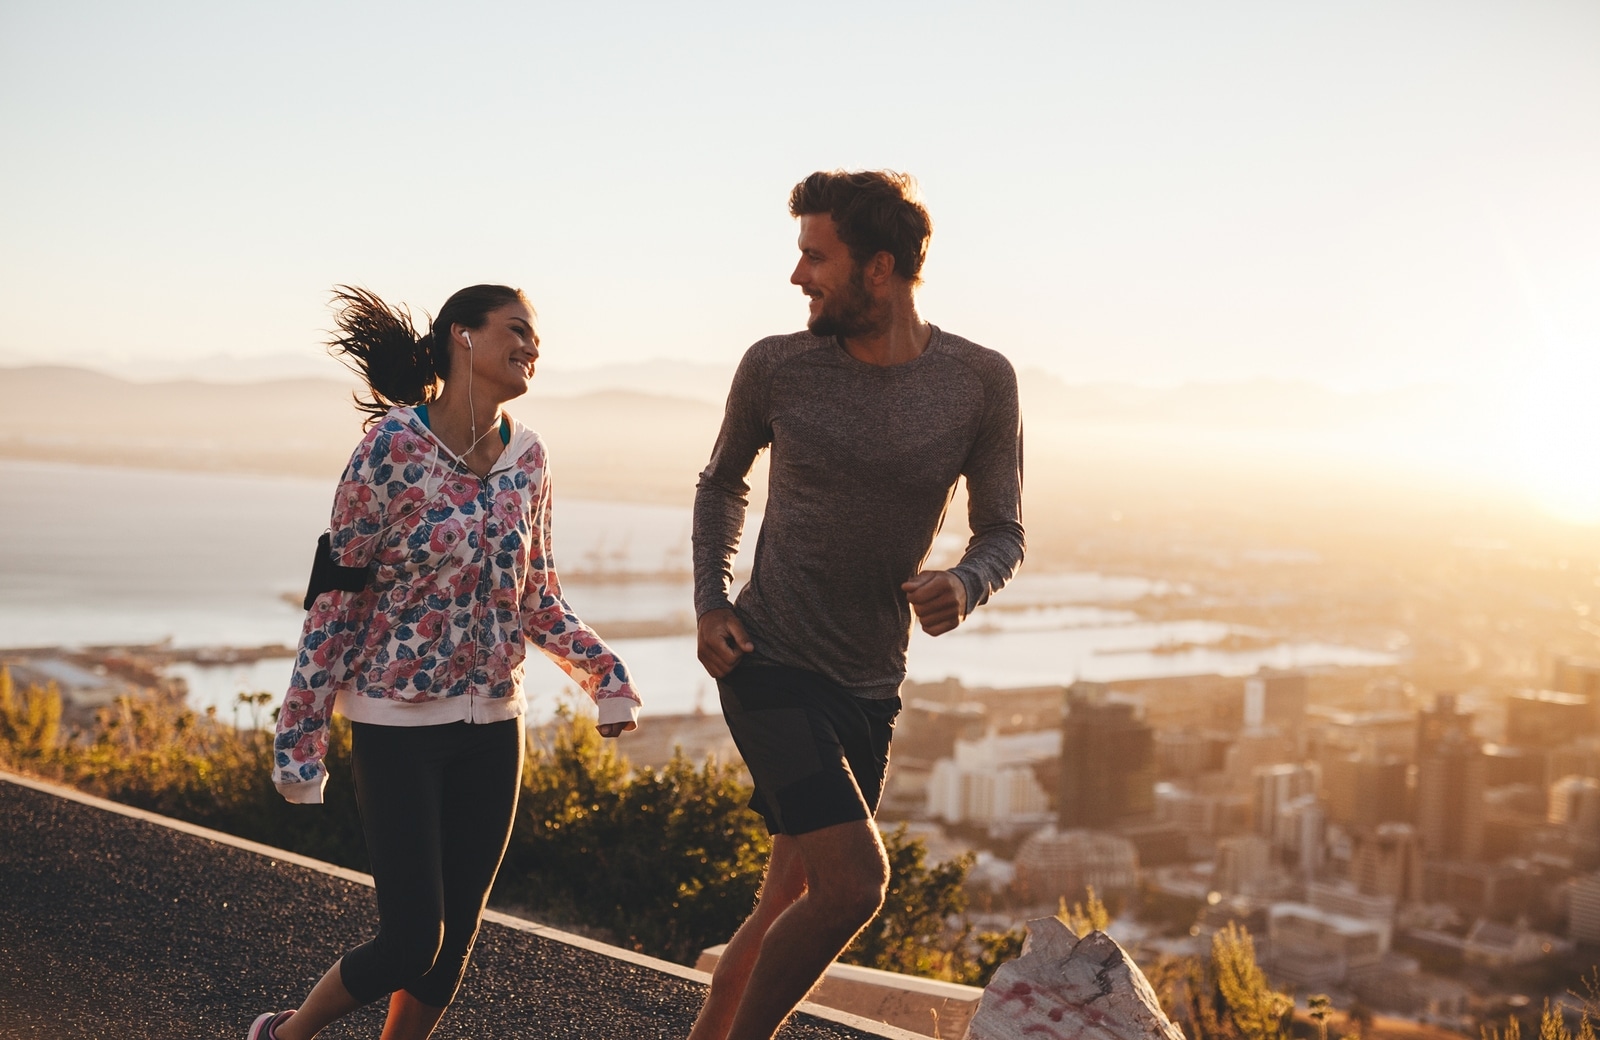 Young couple running together outdoors. Happy young man and woman jogging on country road during sunrise. Two people enjoying morning run.